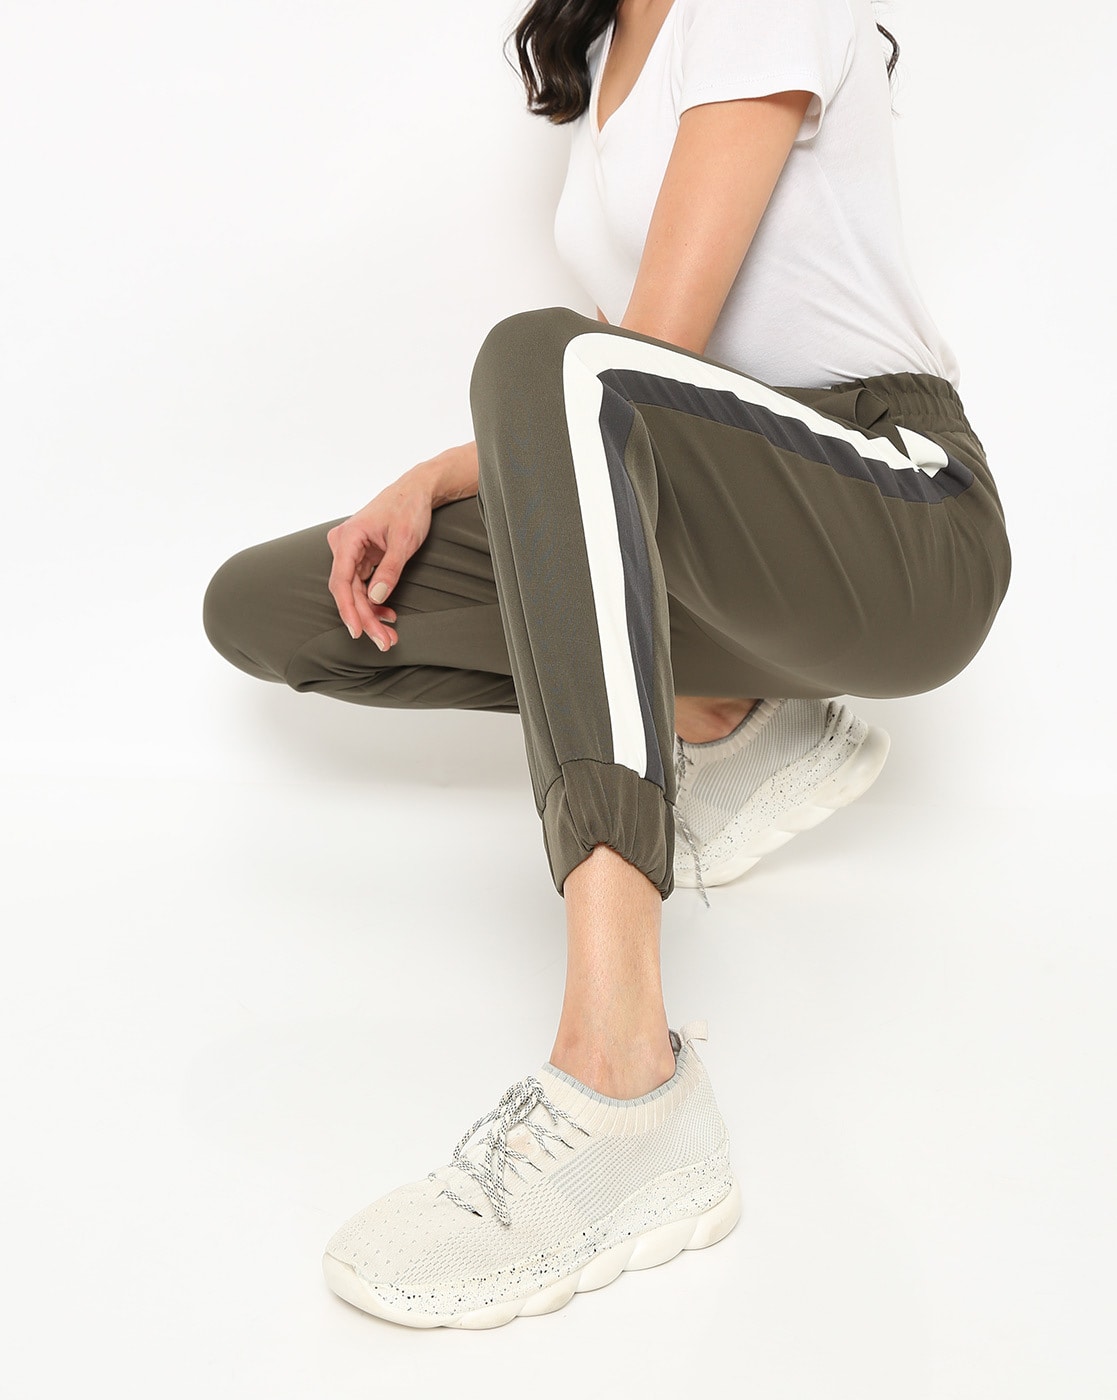 Buy Army Green Cargo Men Jogger Pants Online in India Beyoung